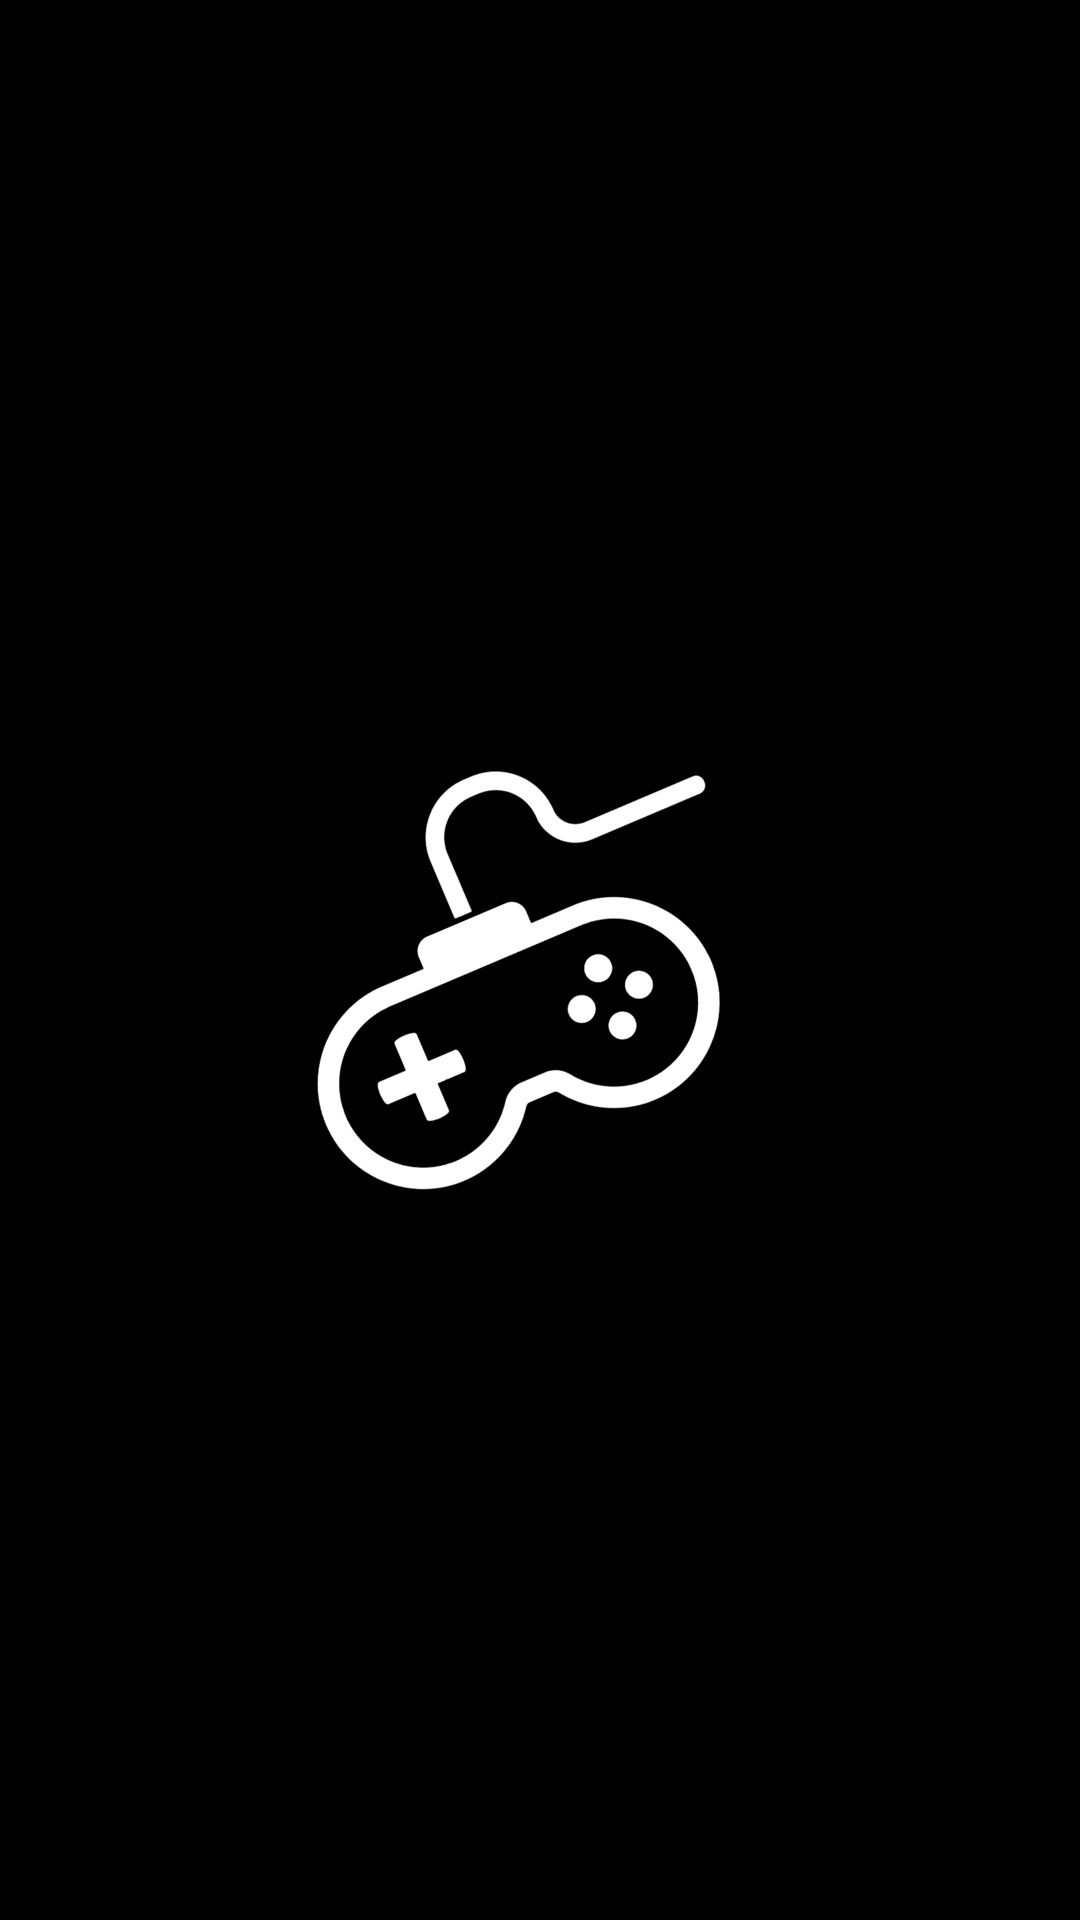 Gaming Controller Minimal Dark 5k iPhone 6s, 6 Plus, Pixel xl , One Plus 3t, 5 HD 4k Wallpaper, Image, Background, Photo and Picture